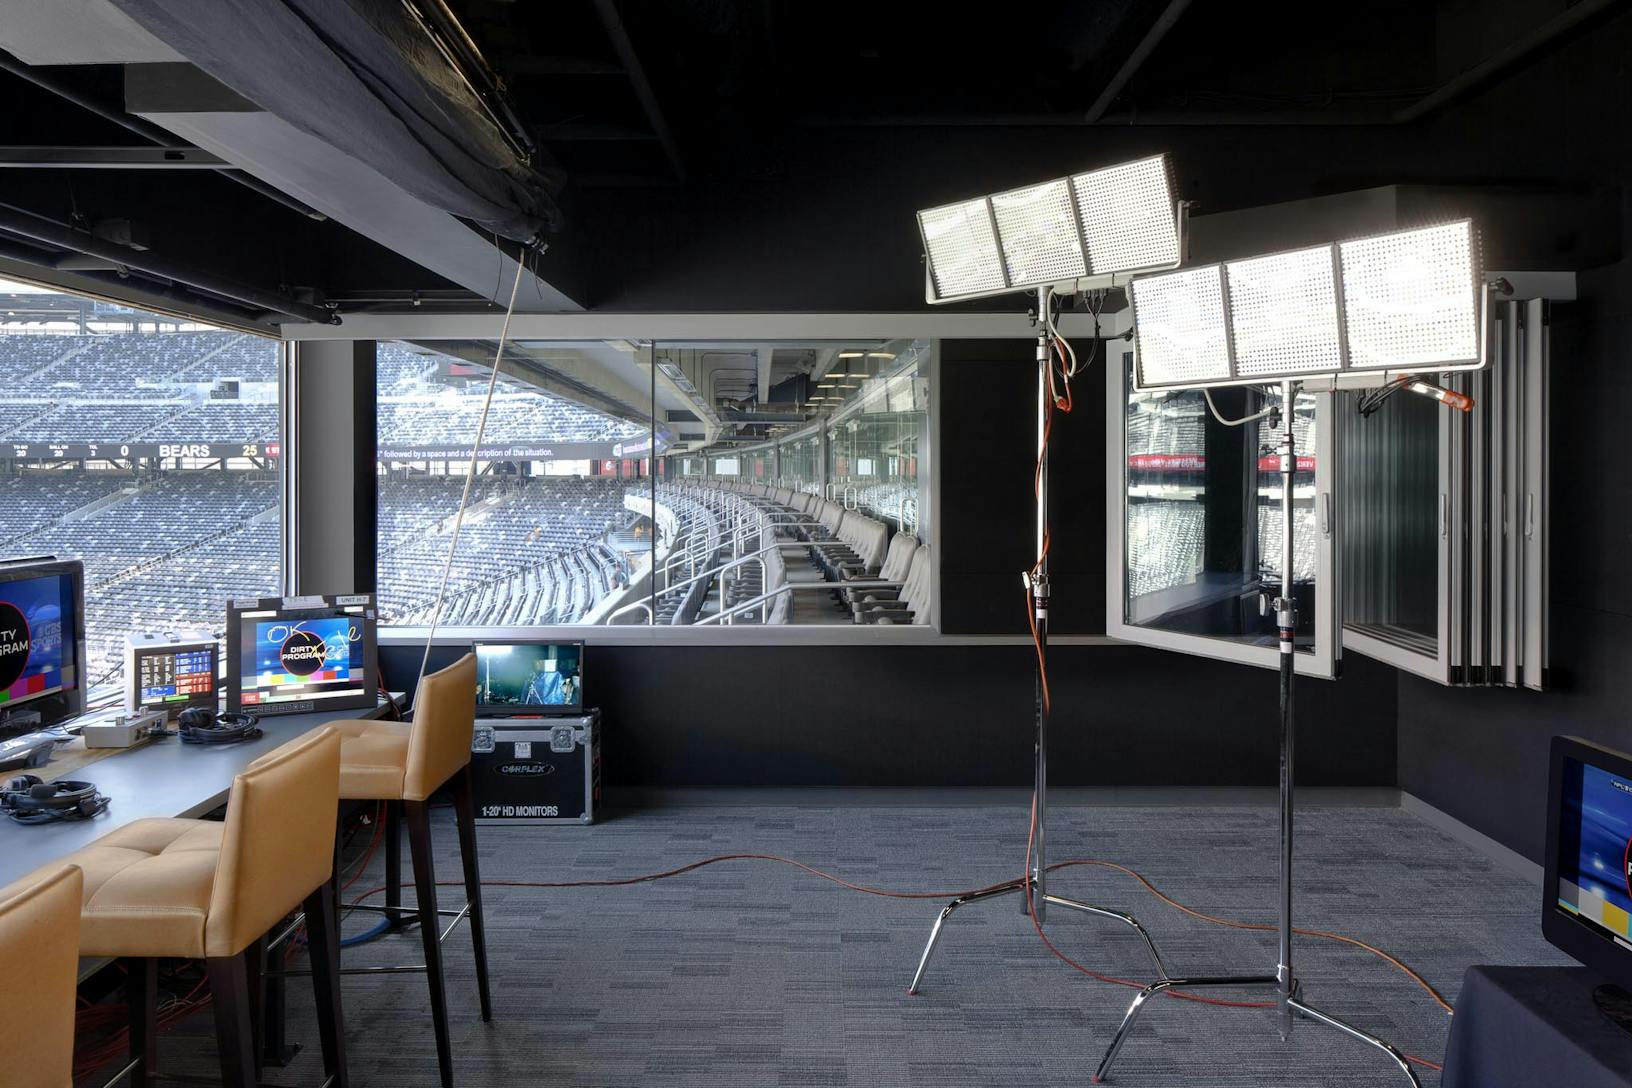 Commercial sliding glass wall at the NY Giants and Jets Stadium